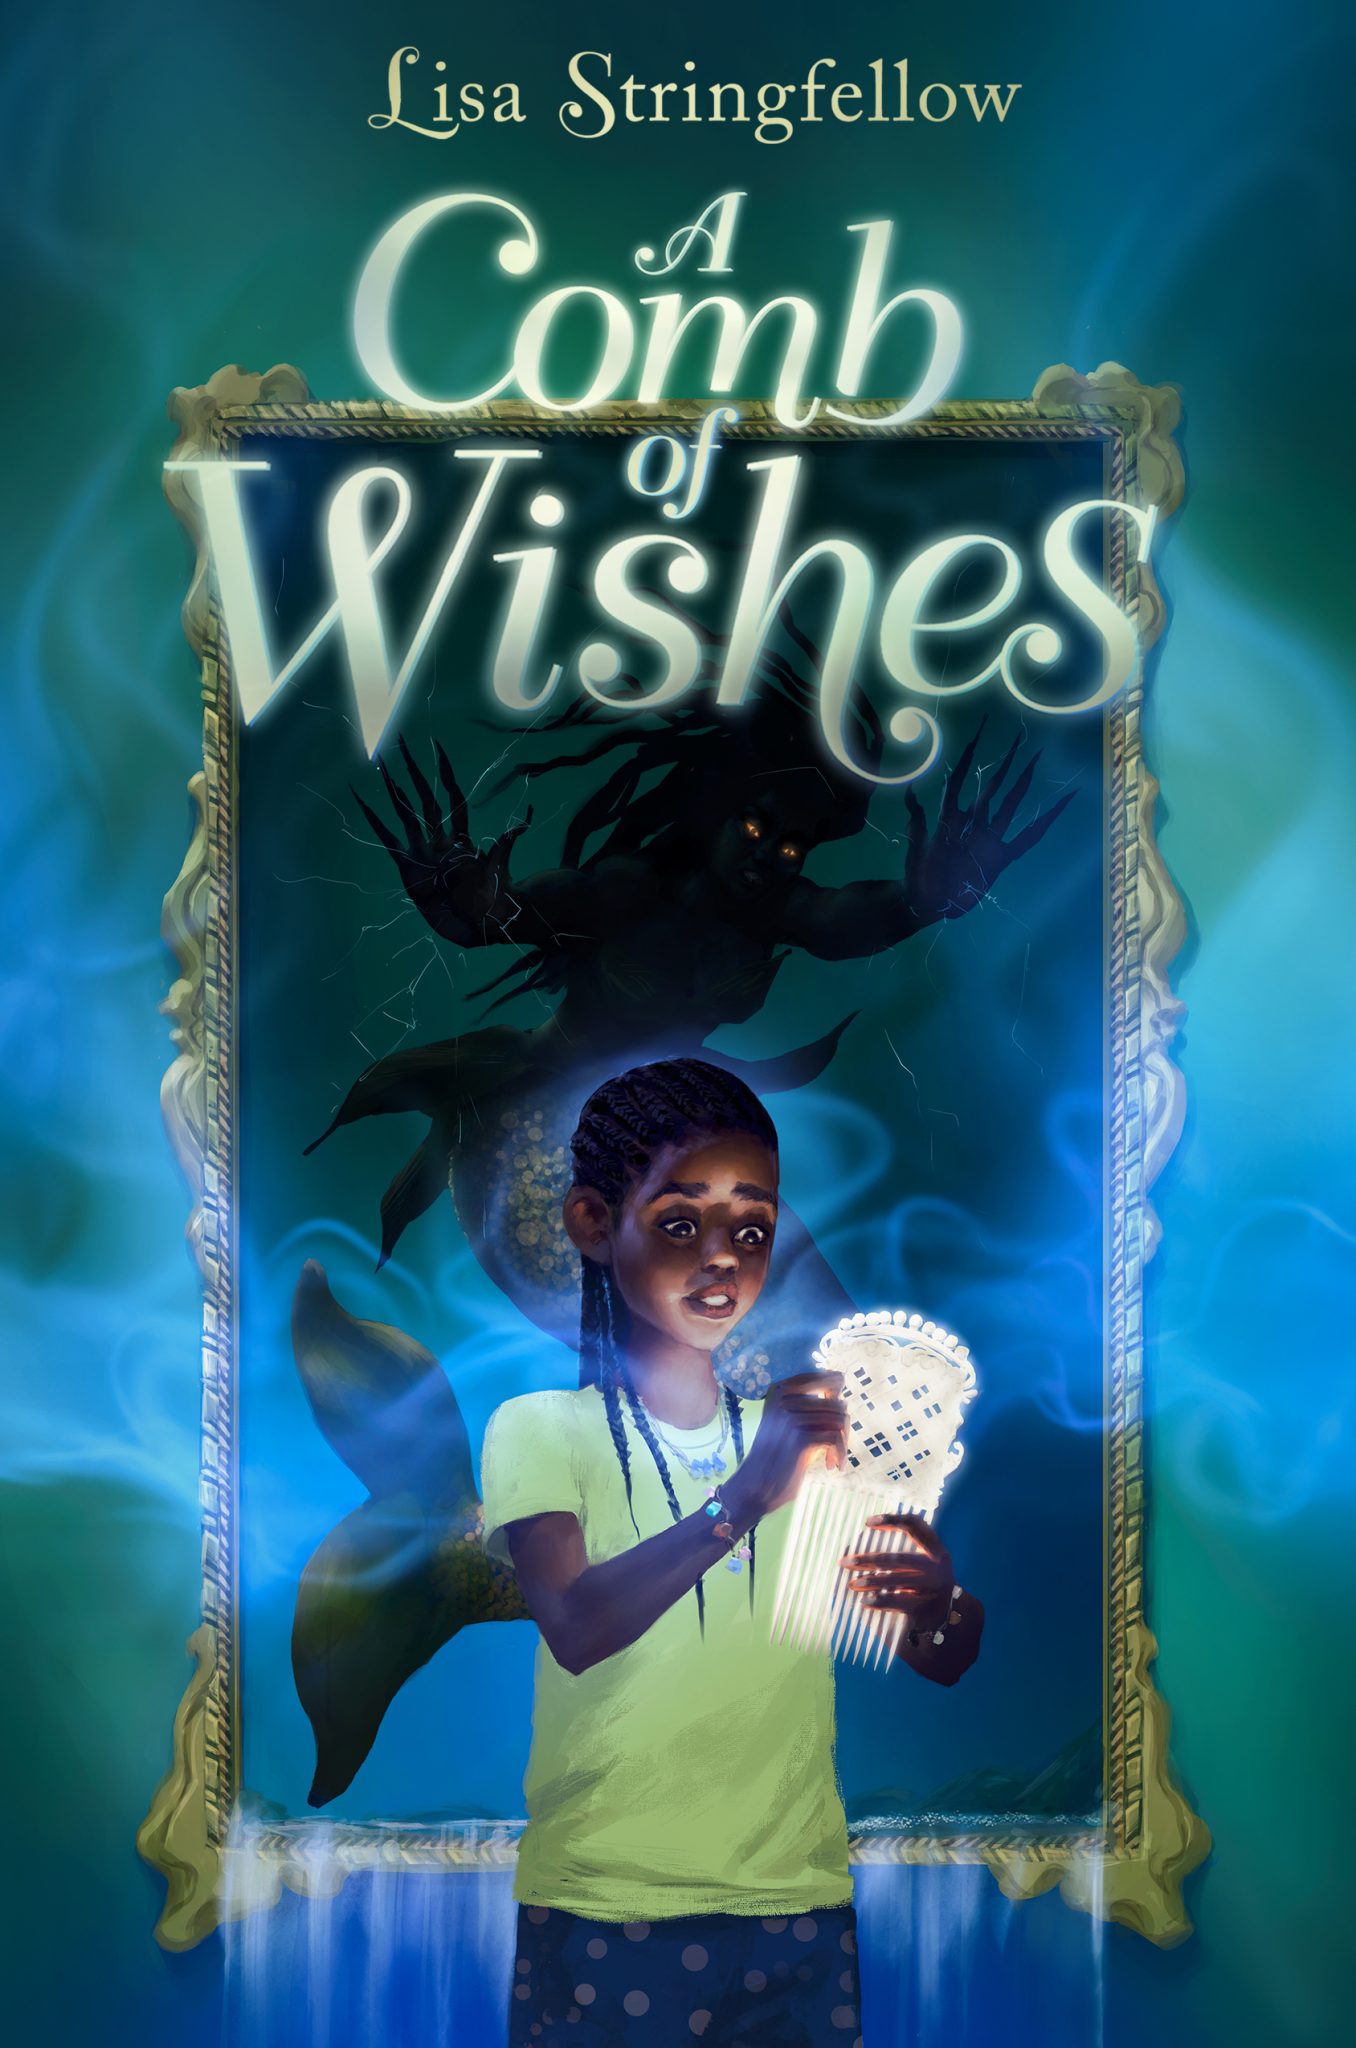 A Comb of Wishes by Lisa Stringfellow